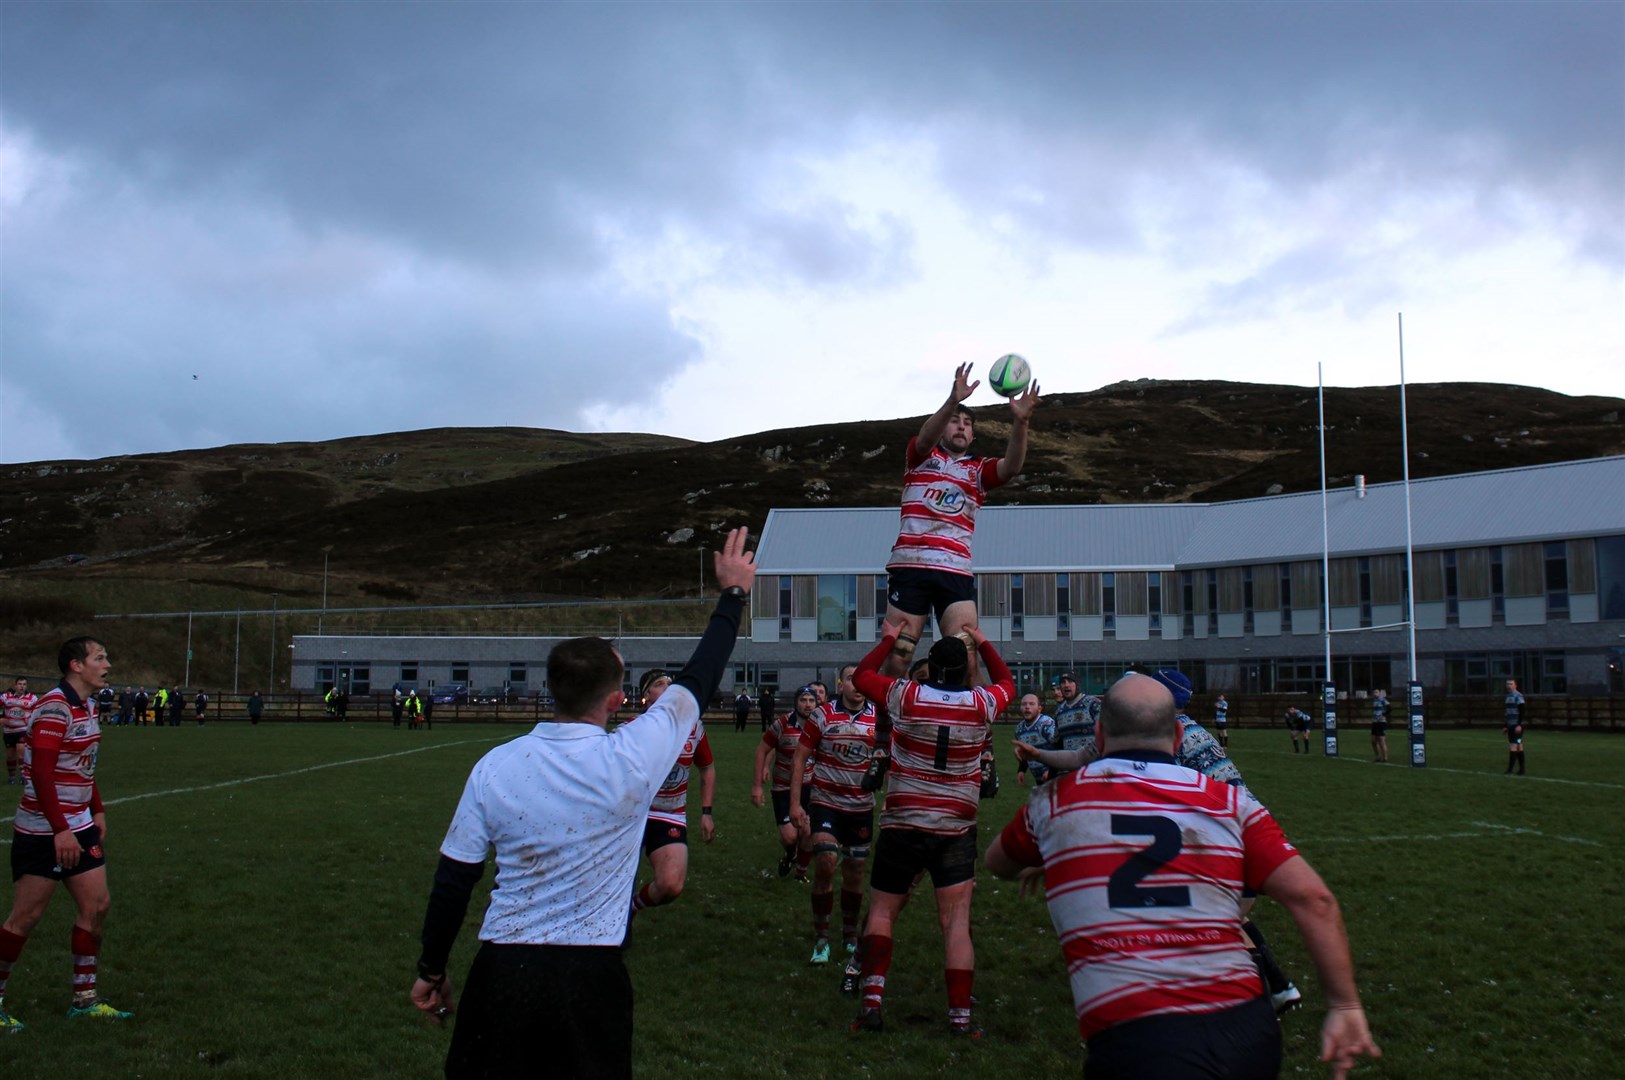 Fergus Nicol takes clean ball in Moray attack near the line. Photo: Grant Mitchell